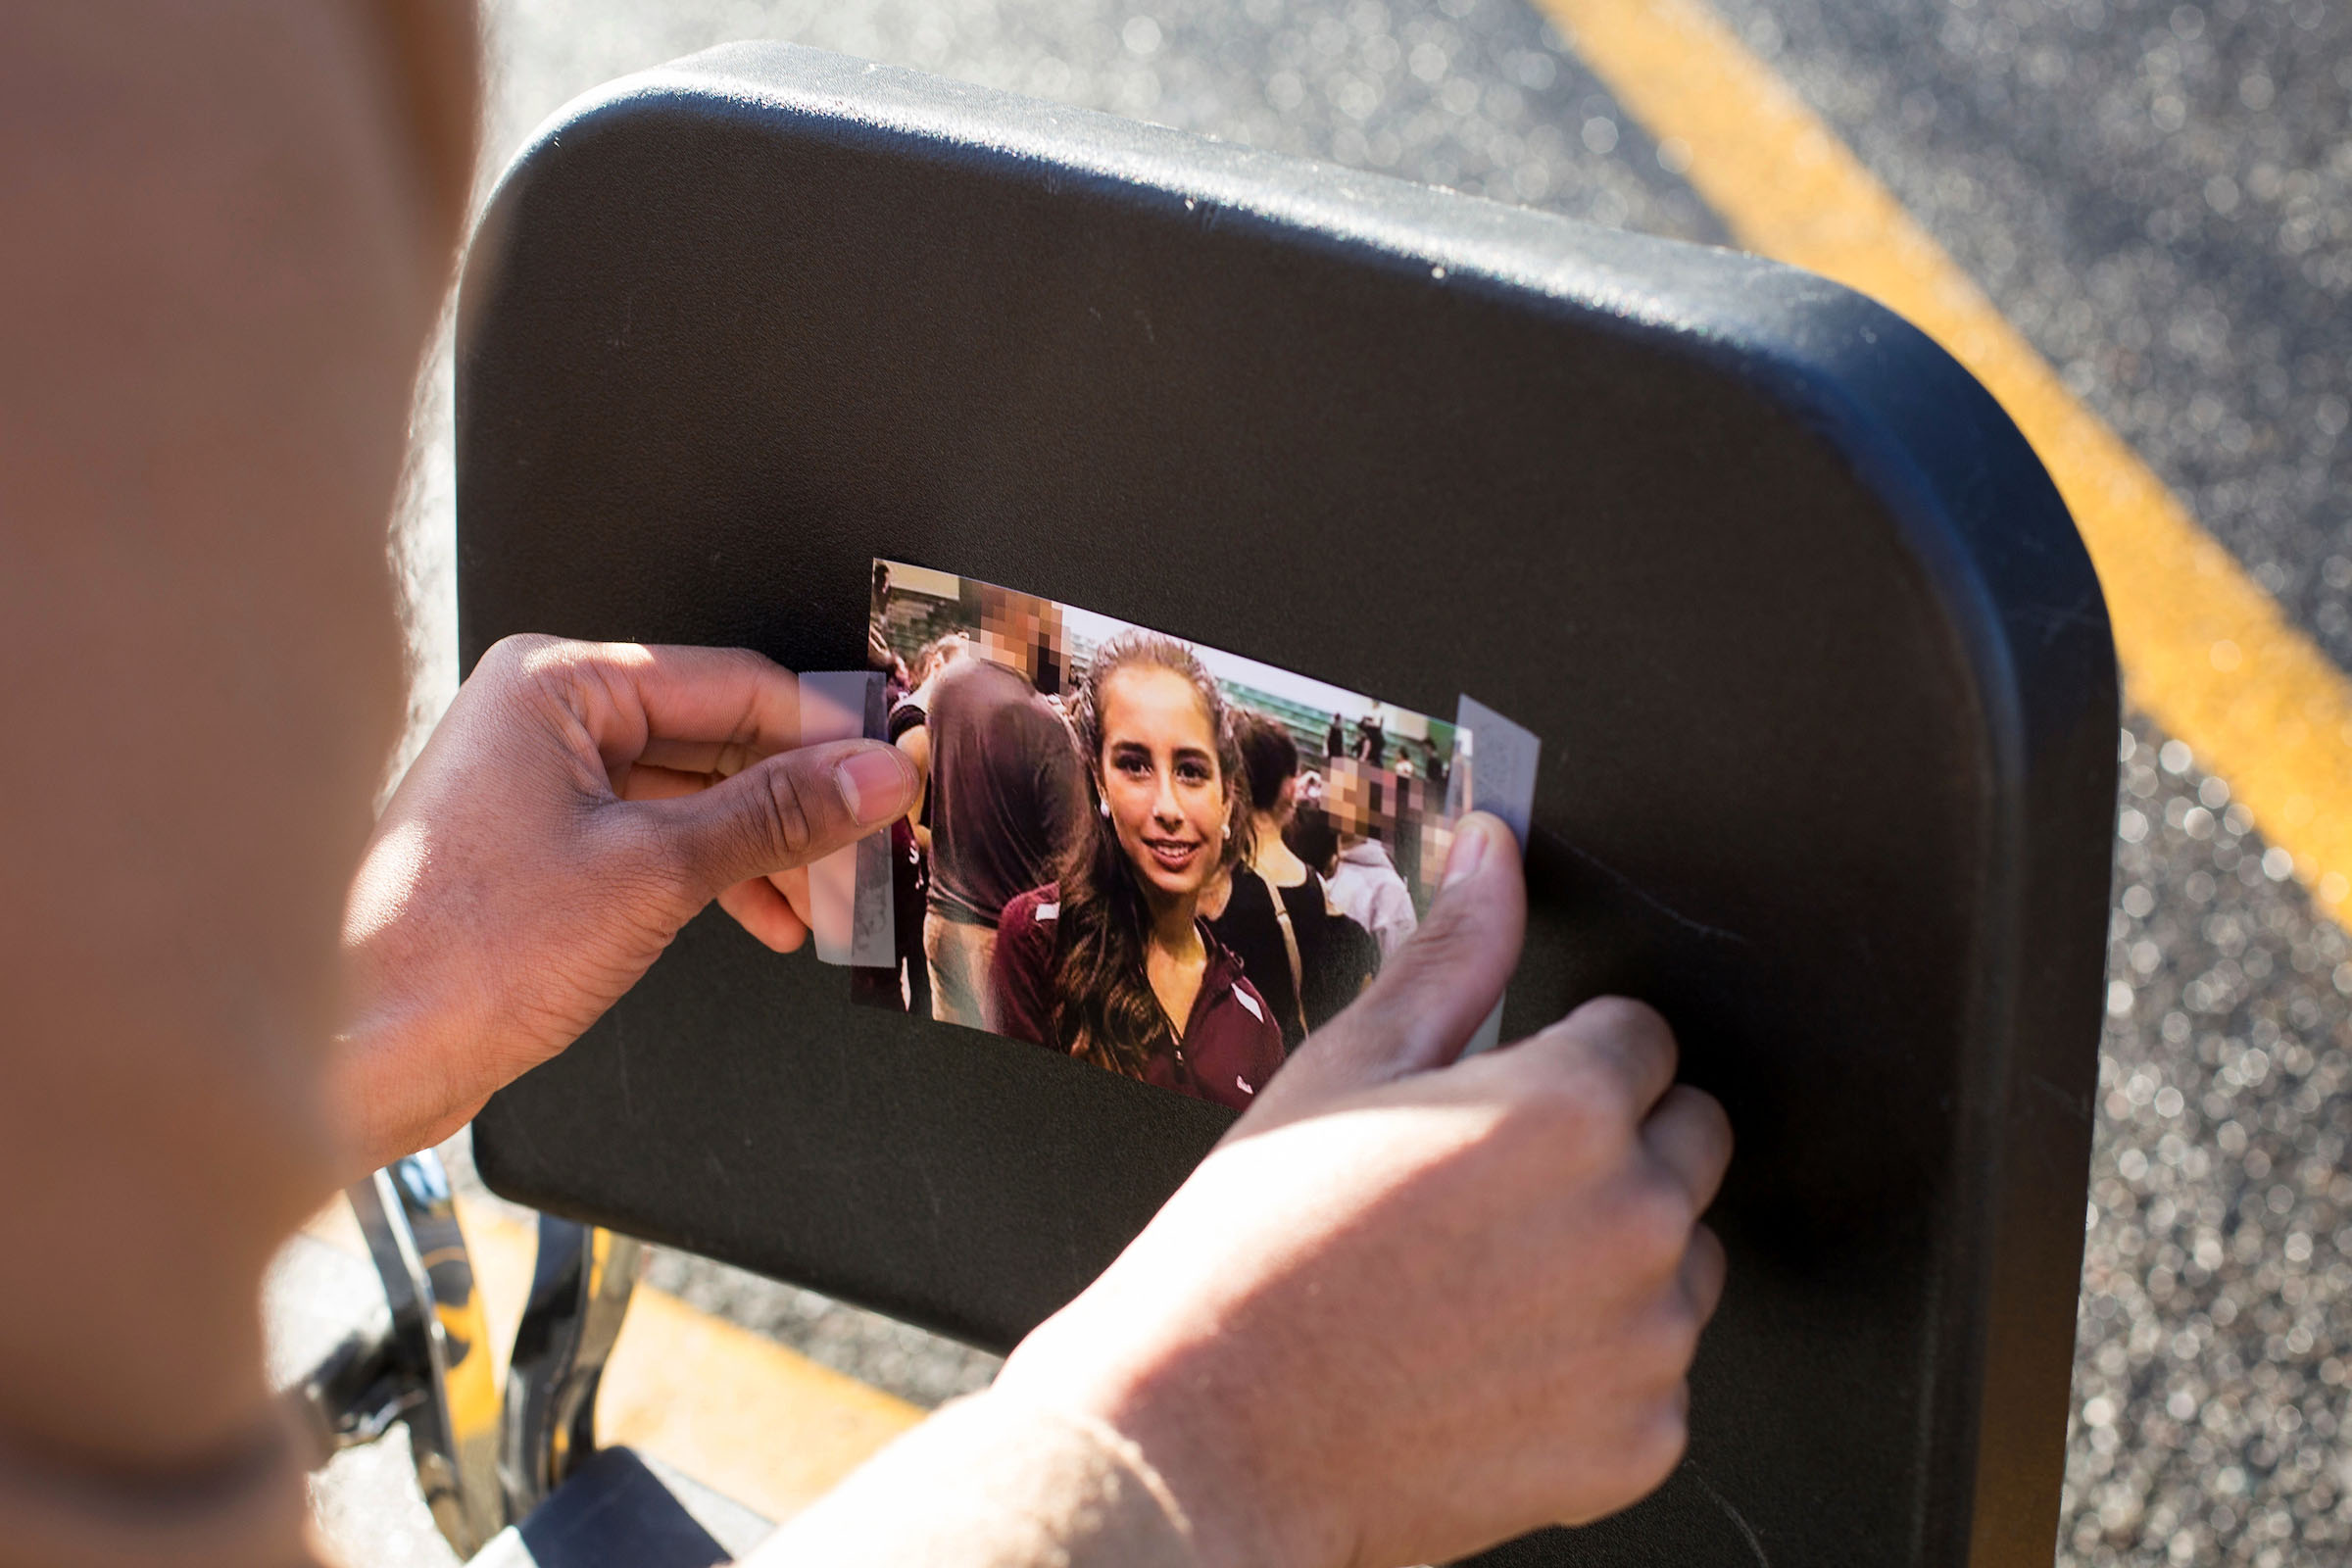 A Tumwater High School student tapes a photo of a victim of the high school shooting in Parkland, Florida in February. (Photo by David Ryder for Crosscut)